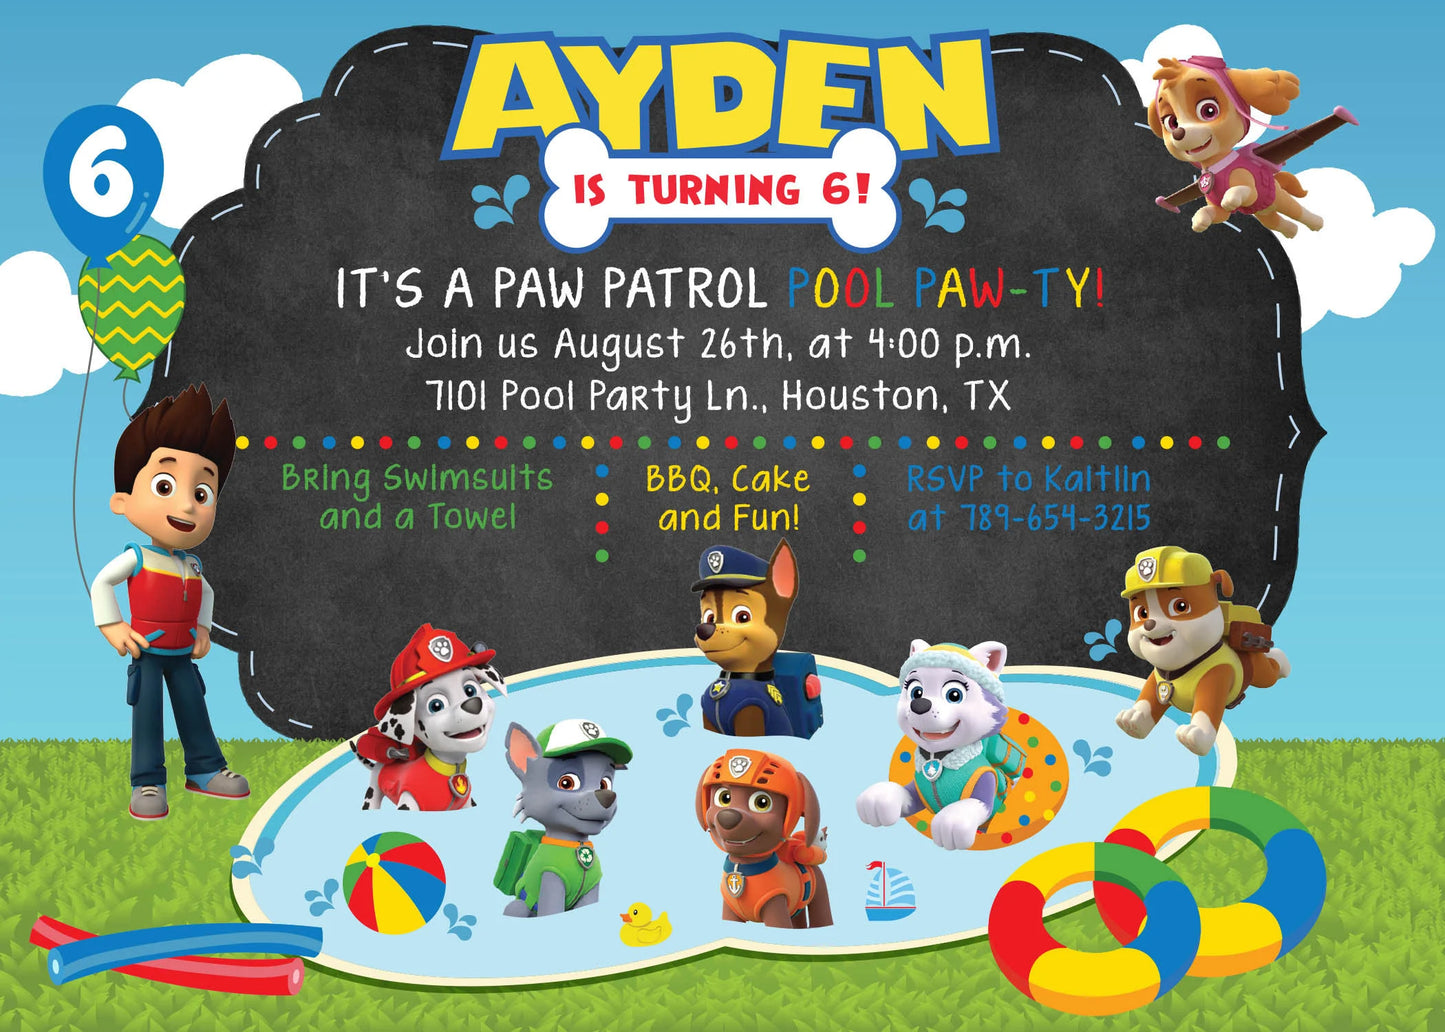 Paw Patrol POOL PARTY Digital or Printed Birthday Party Invitation with or without Photo!